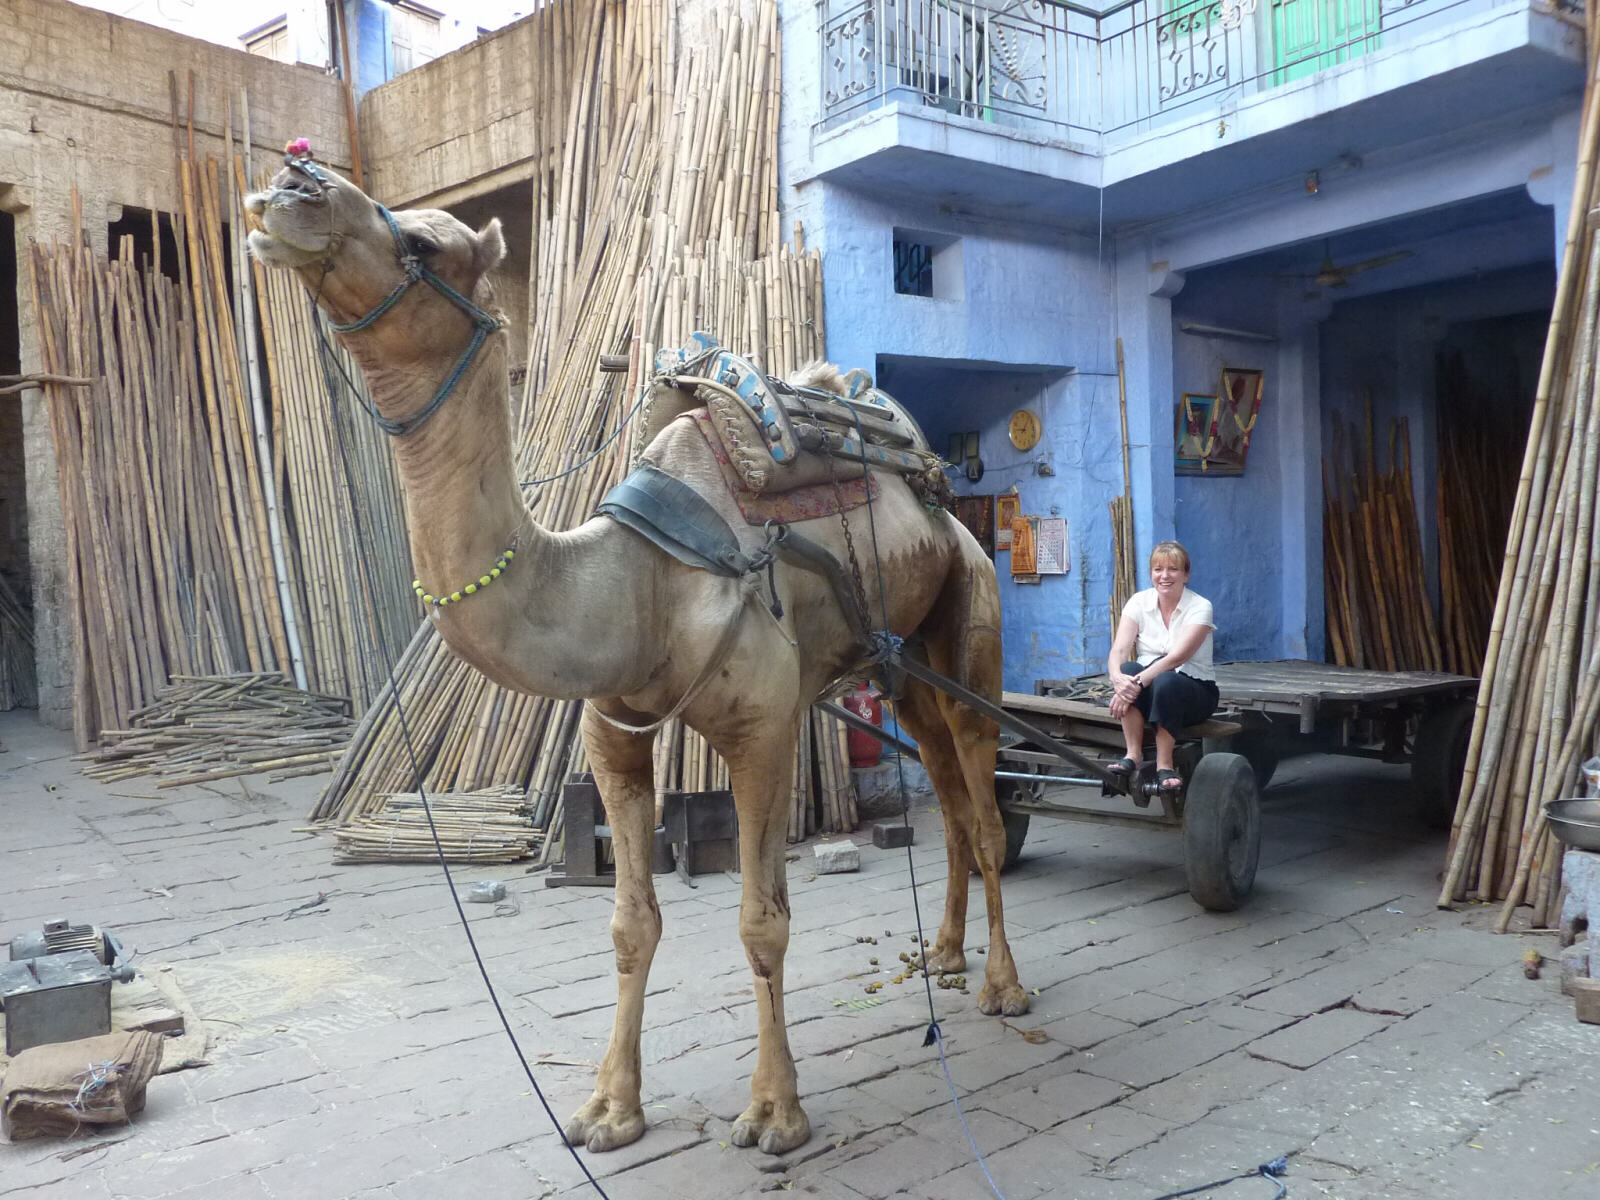 A camel and a cart in an alleyway in Jodhpur, Rajasthan